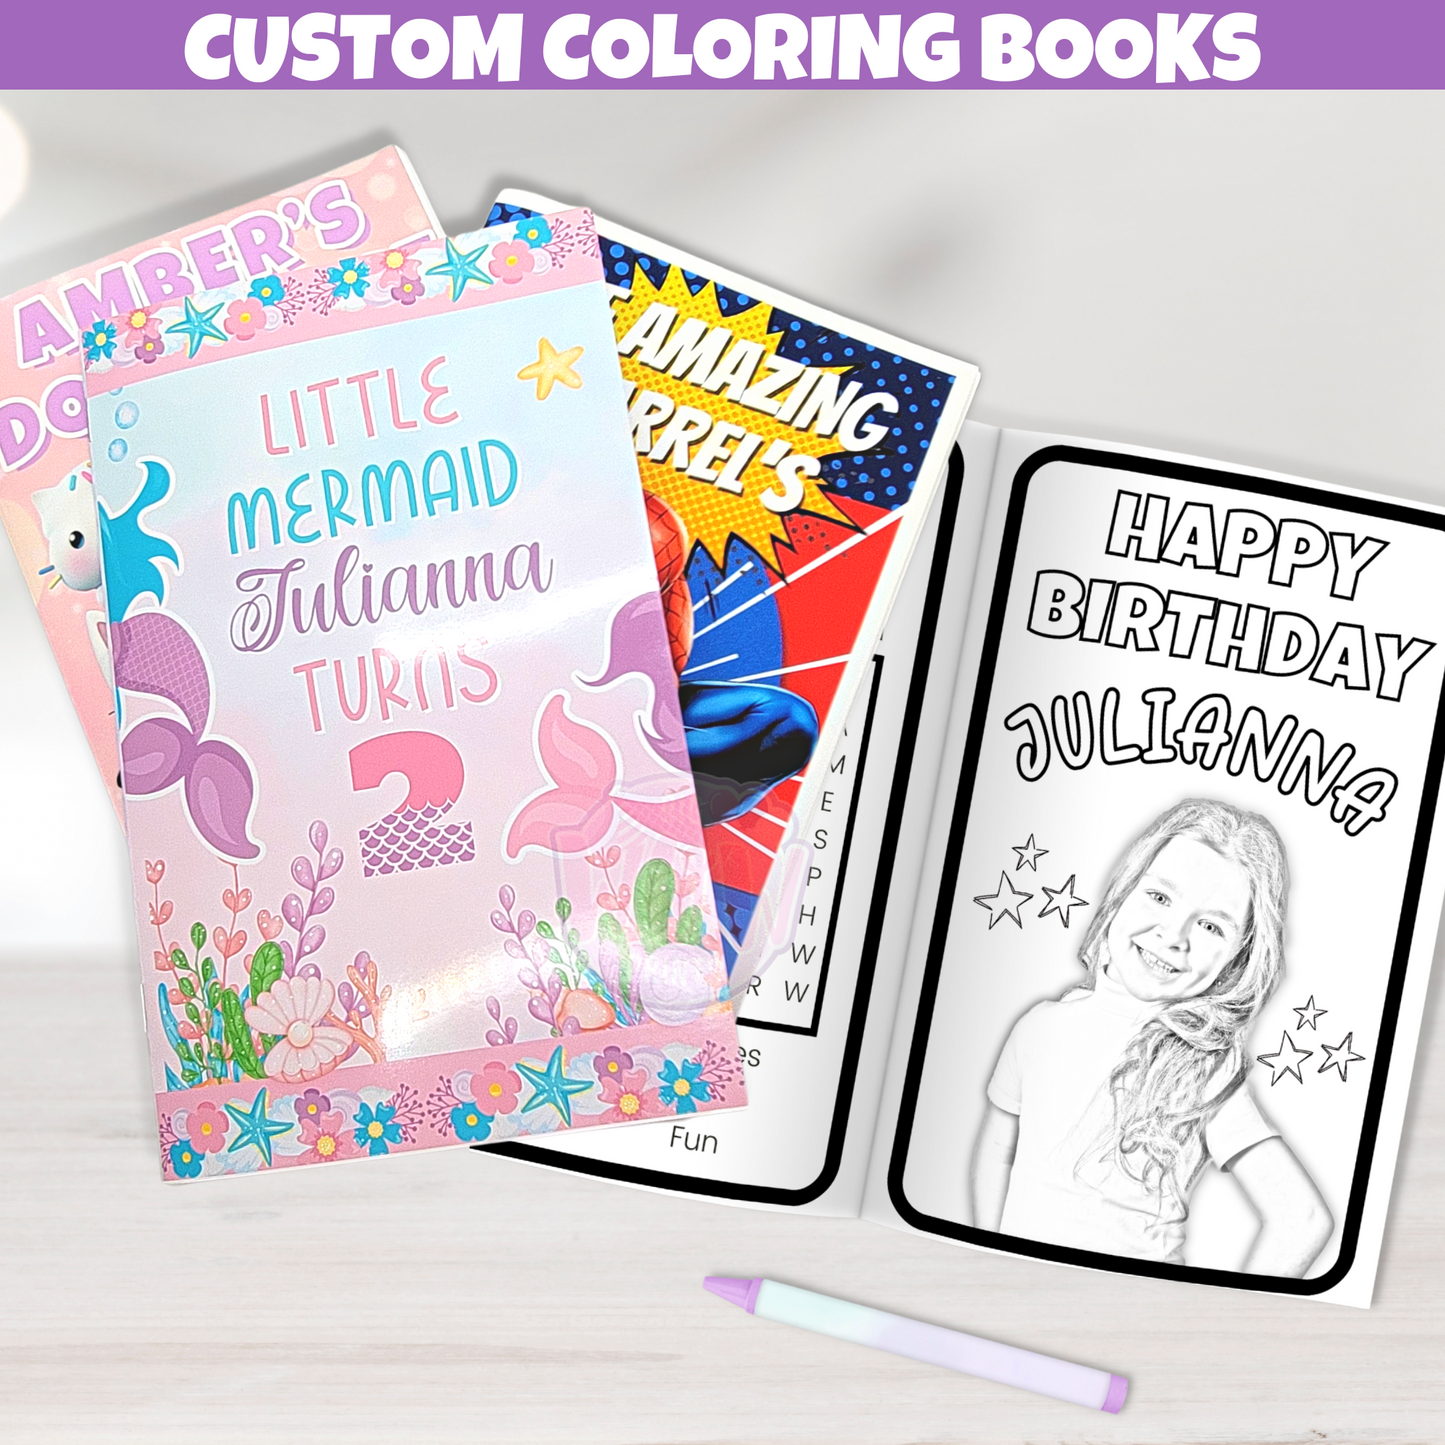 CUSTOM Kids Coloring Books Personalized with Photo, Custom Birthday Activity Sheets, Girl Boy Unique Party Favors, Printed Coloring Books Centerpiece